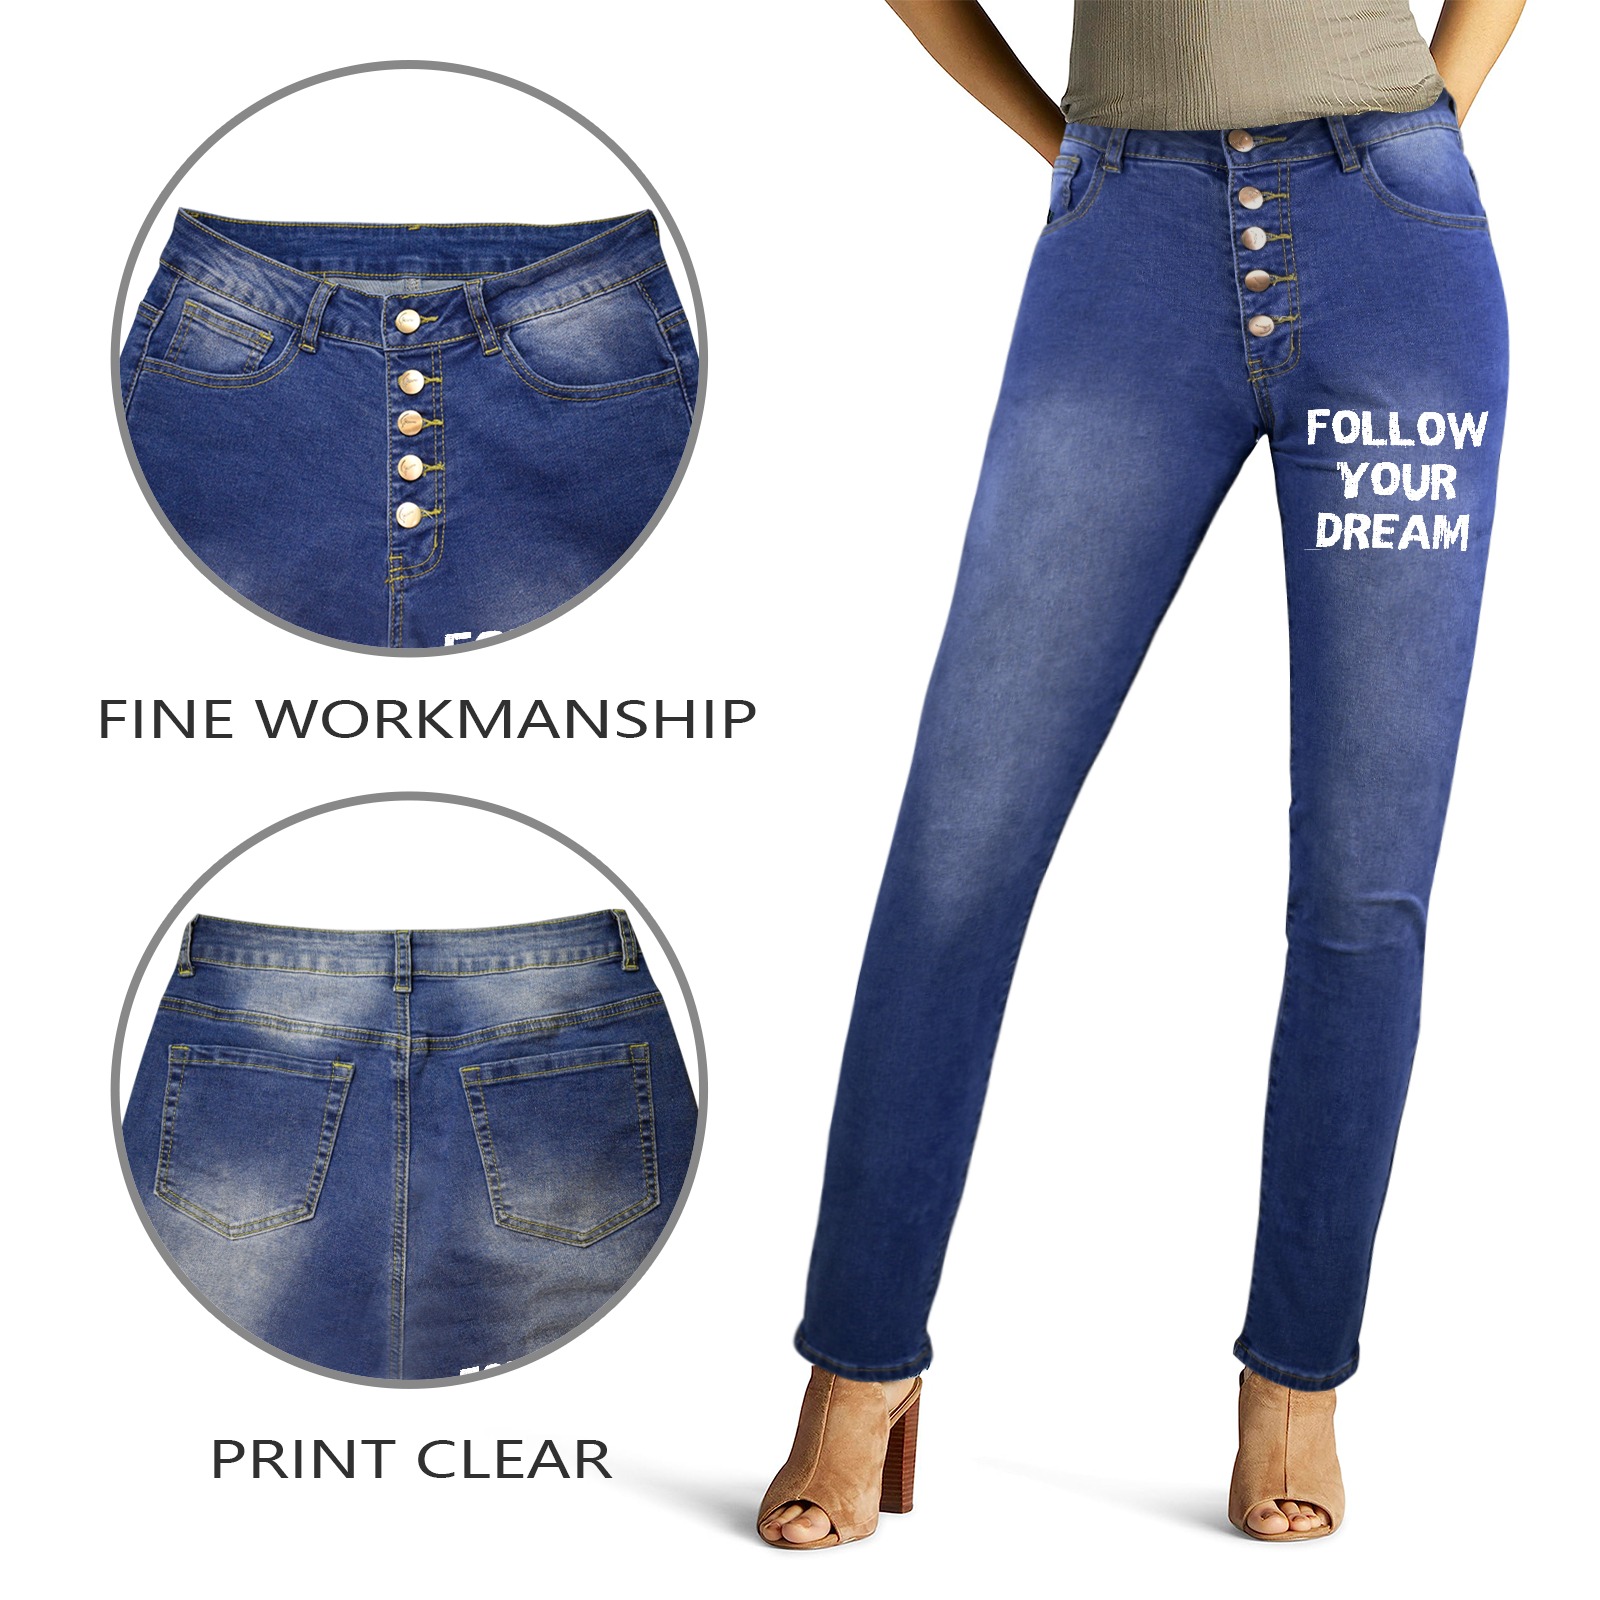 Follow your dream cool awesome white text. Women's Jeans (Front&Back Printing)